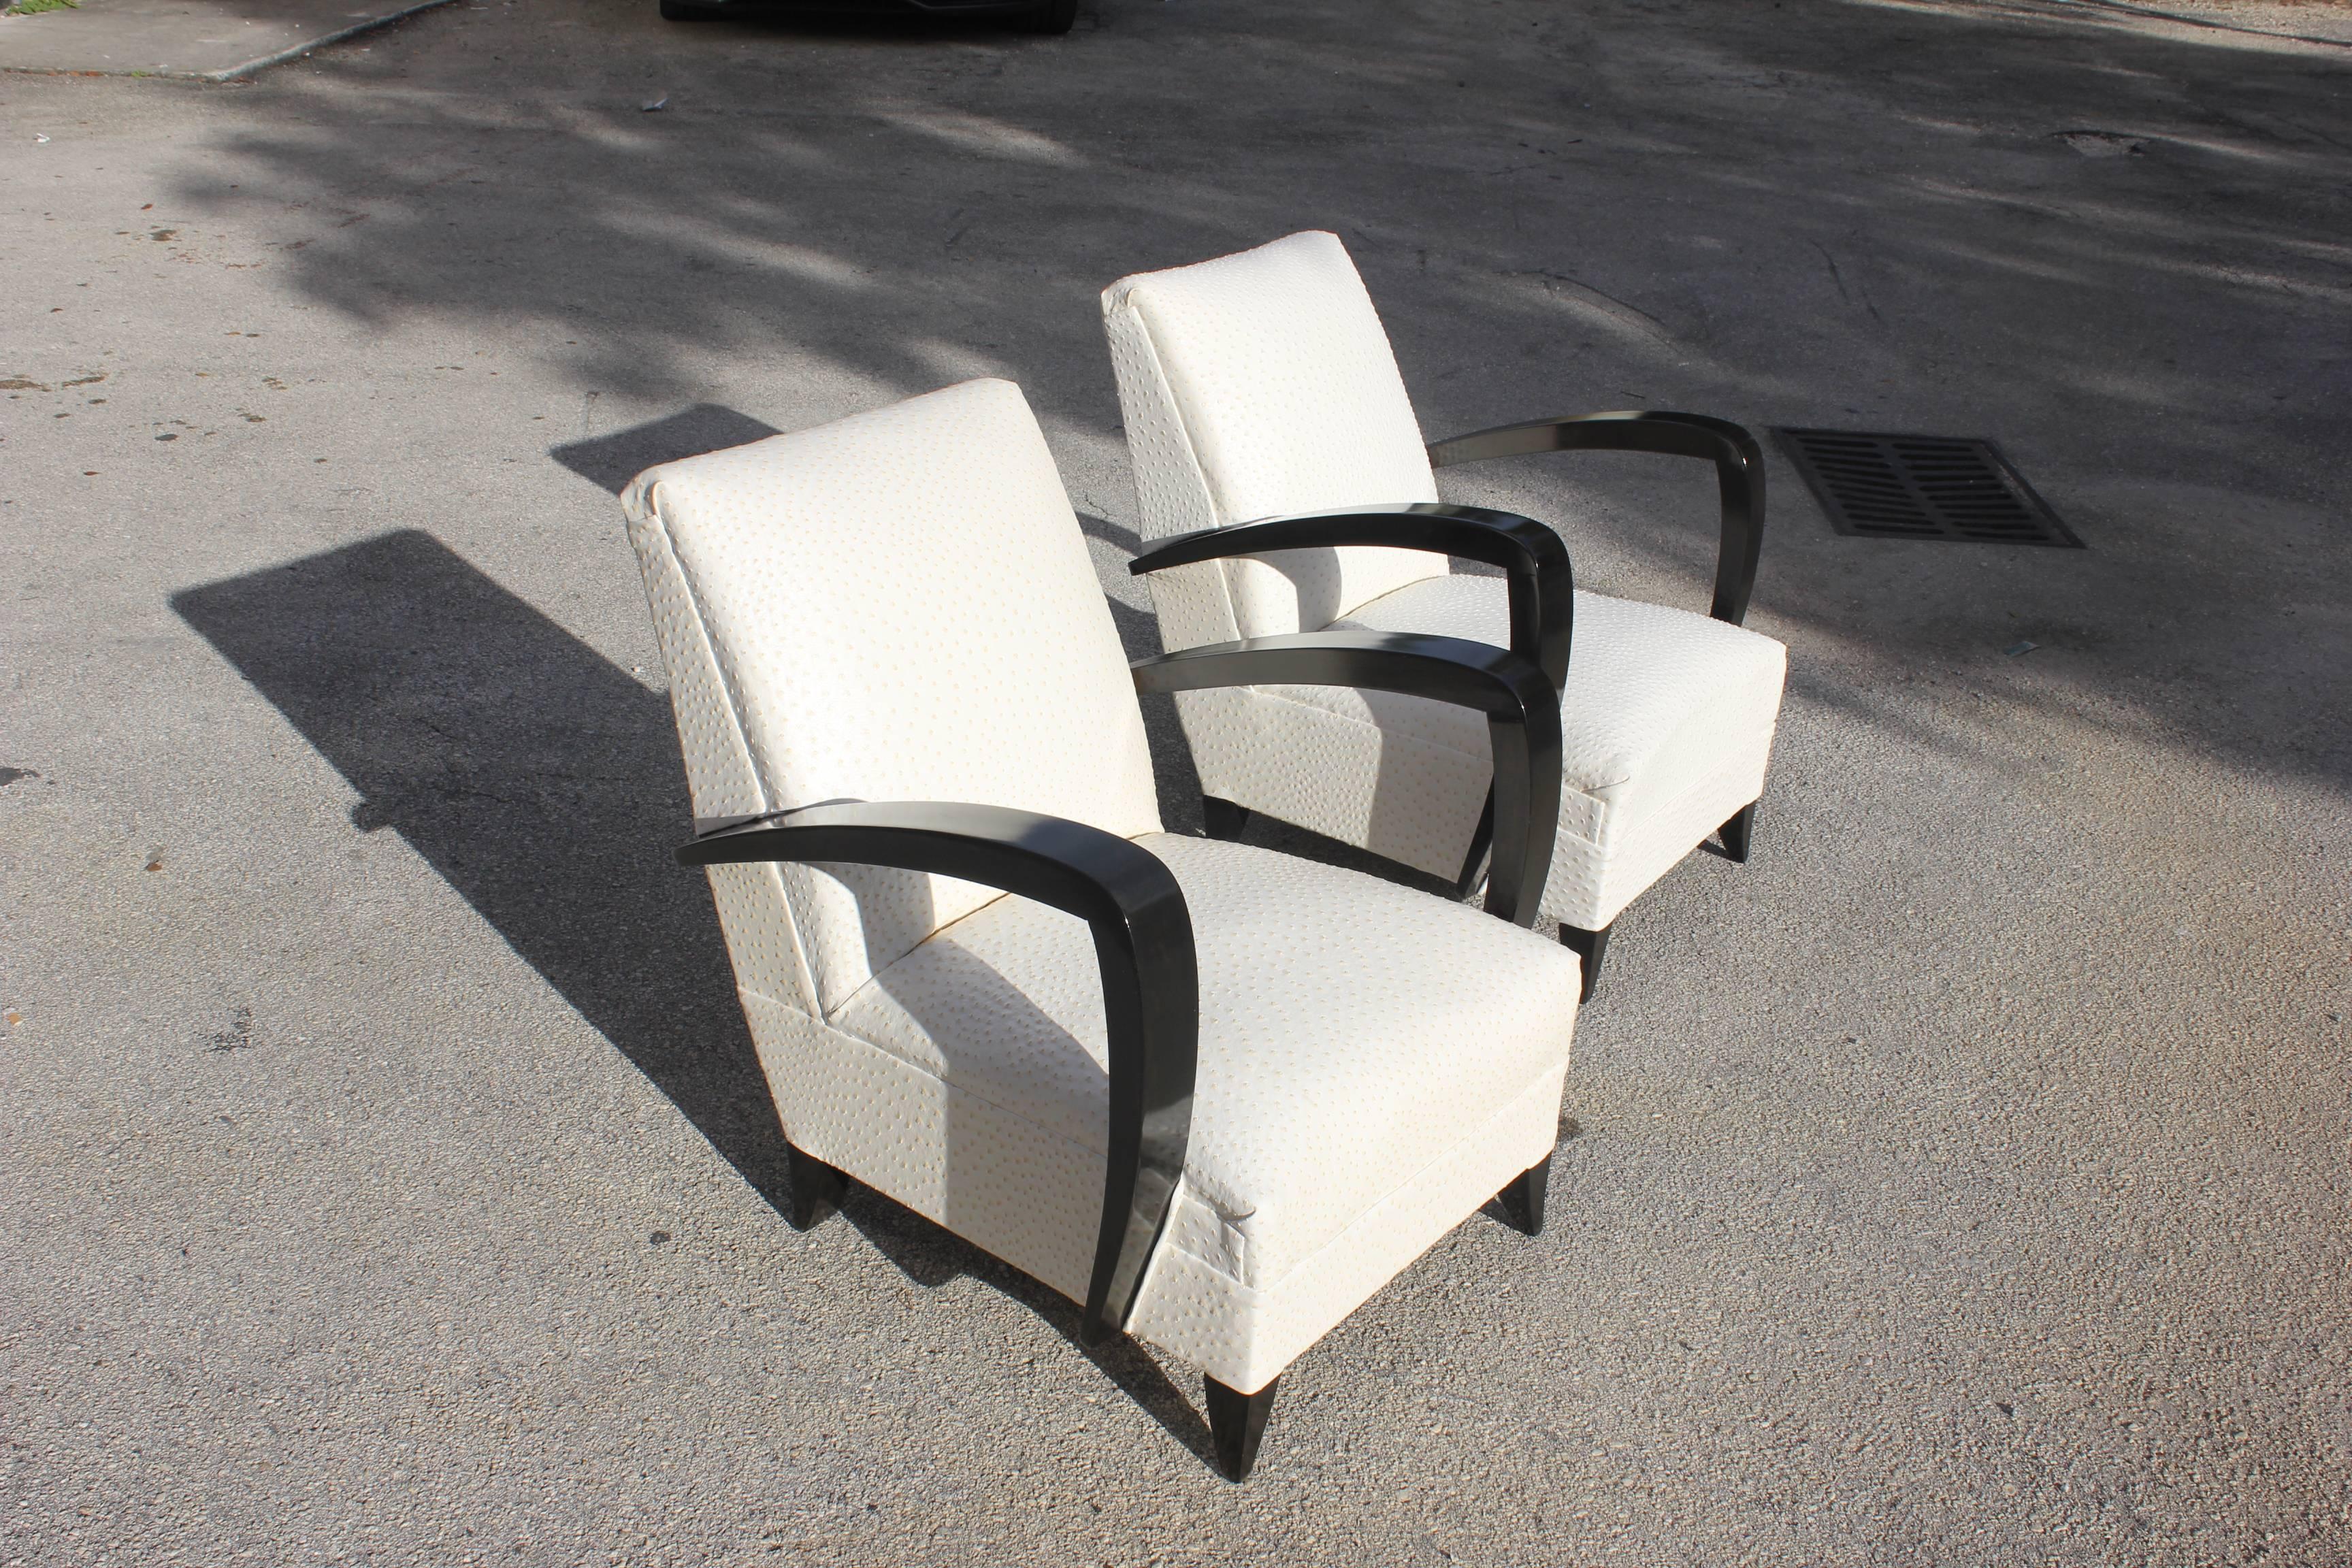 Elegant Pair of French Art Deco Armchairs or Club Chairs Attributed to Rene Prou 1